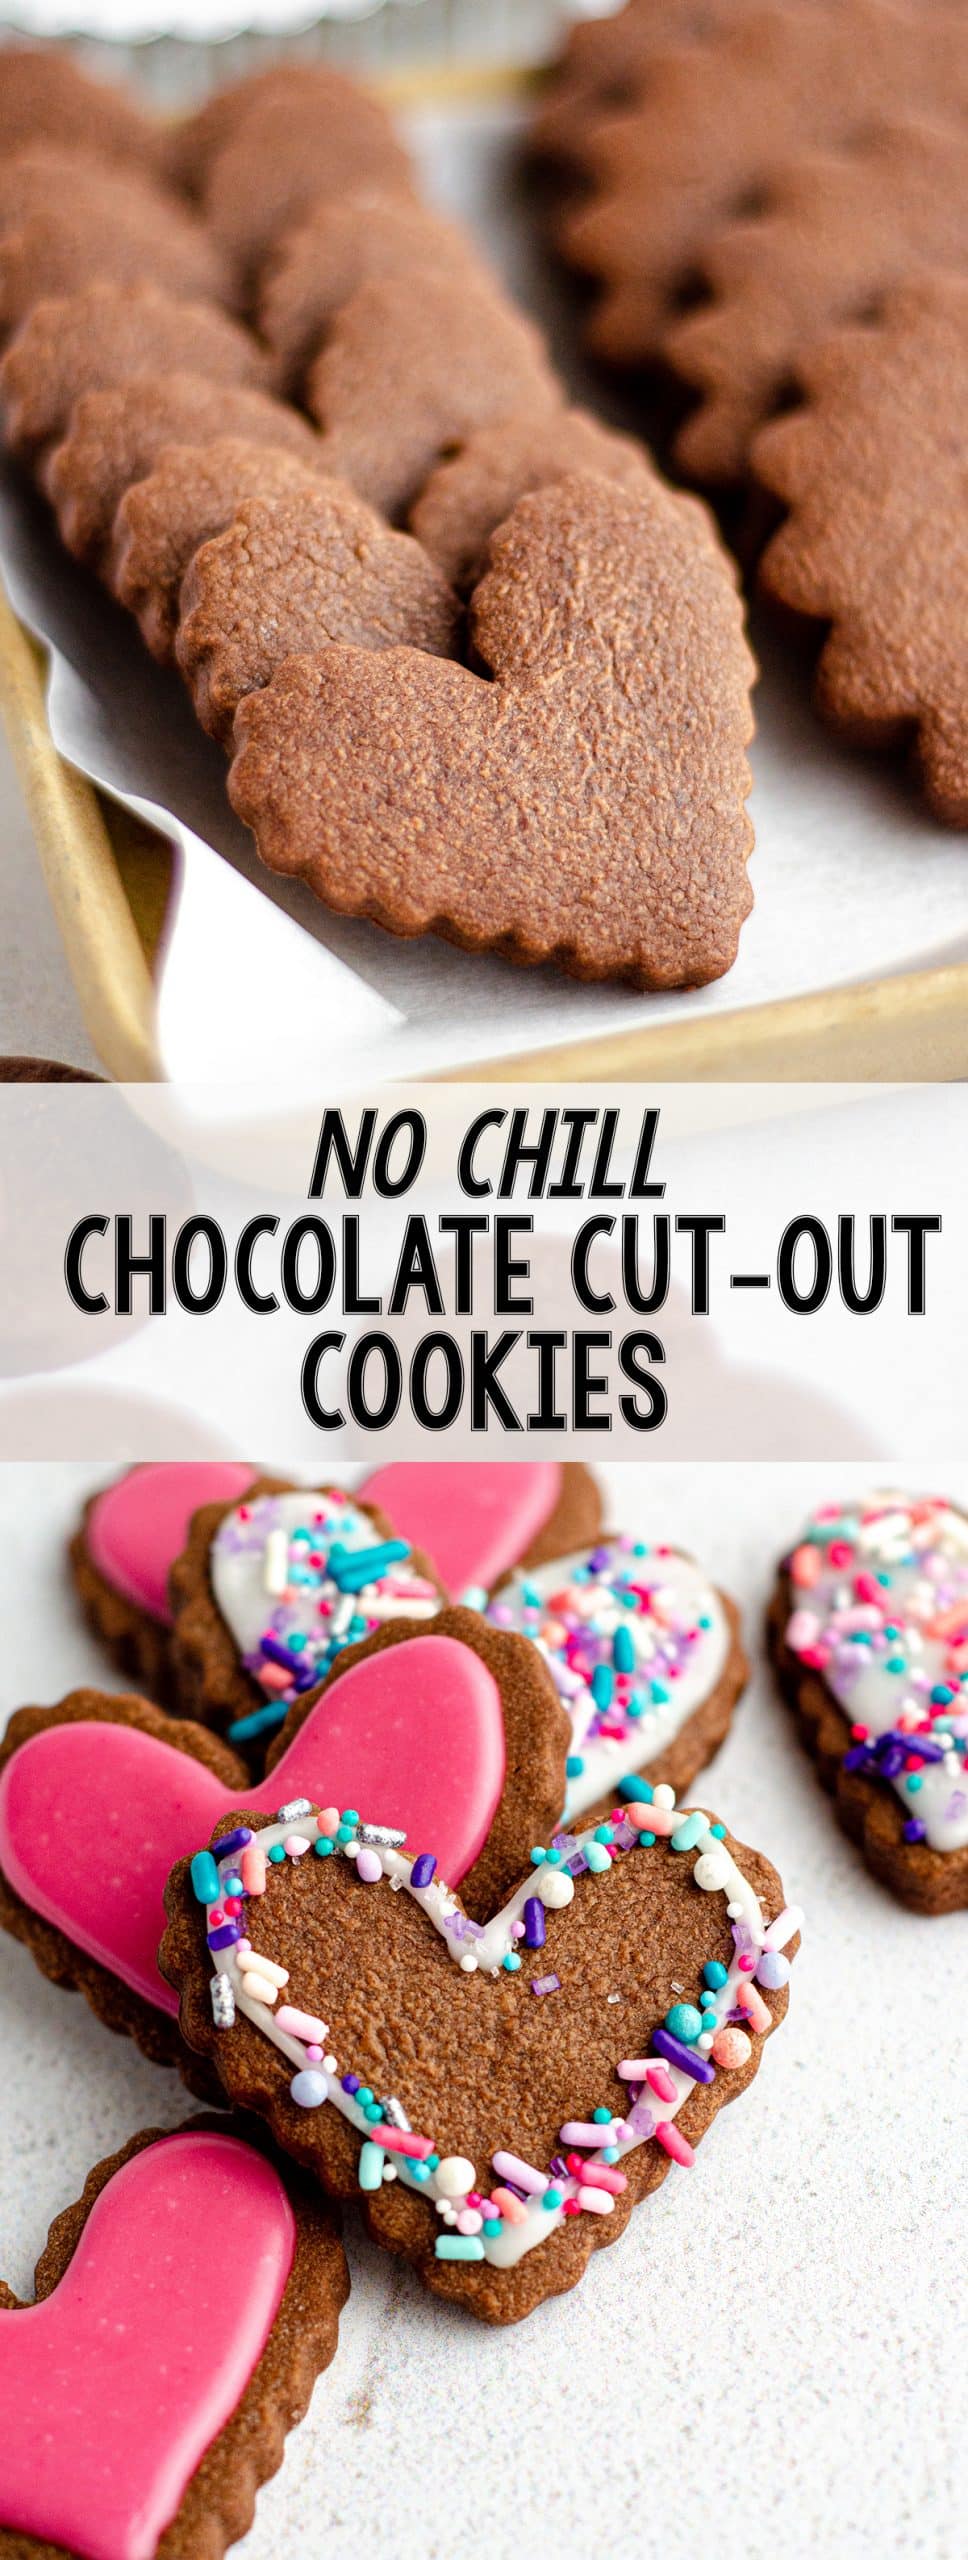 Soft chocolate cut out sugar cookies that require no dough chilling and are perfect for shaping with cookie cutters. Crisp edges, soft centers, and plenty of room for decorative icing and sprinkles. via @frshaprilflours